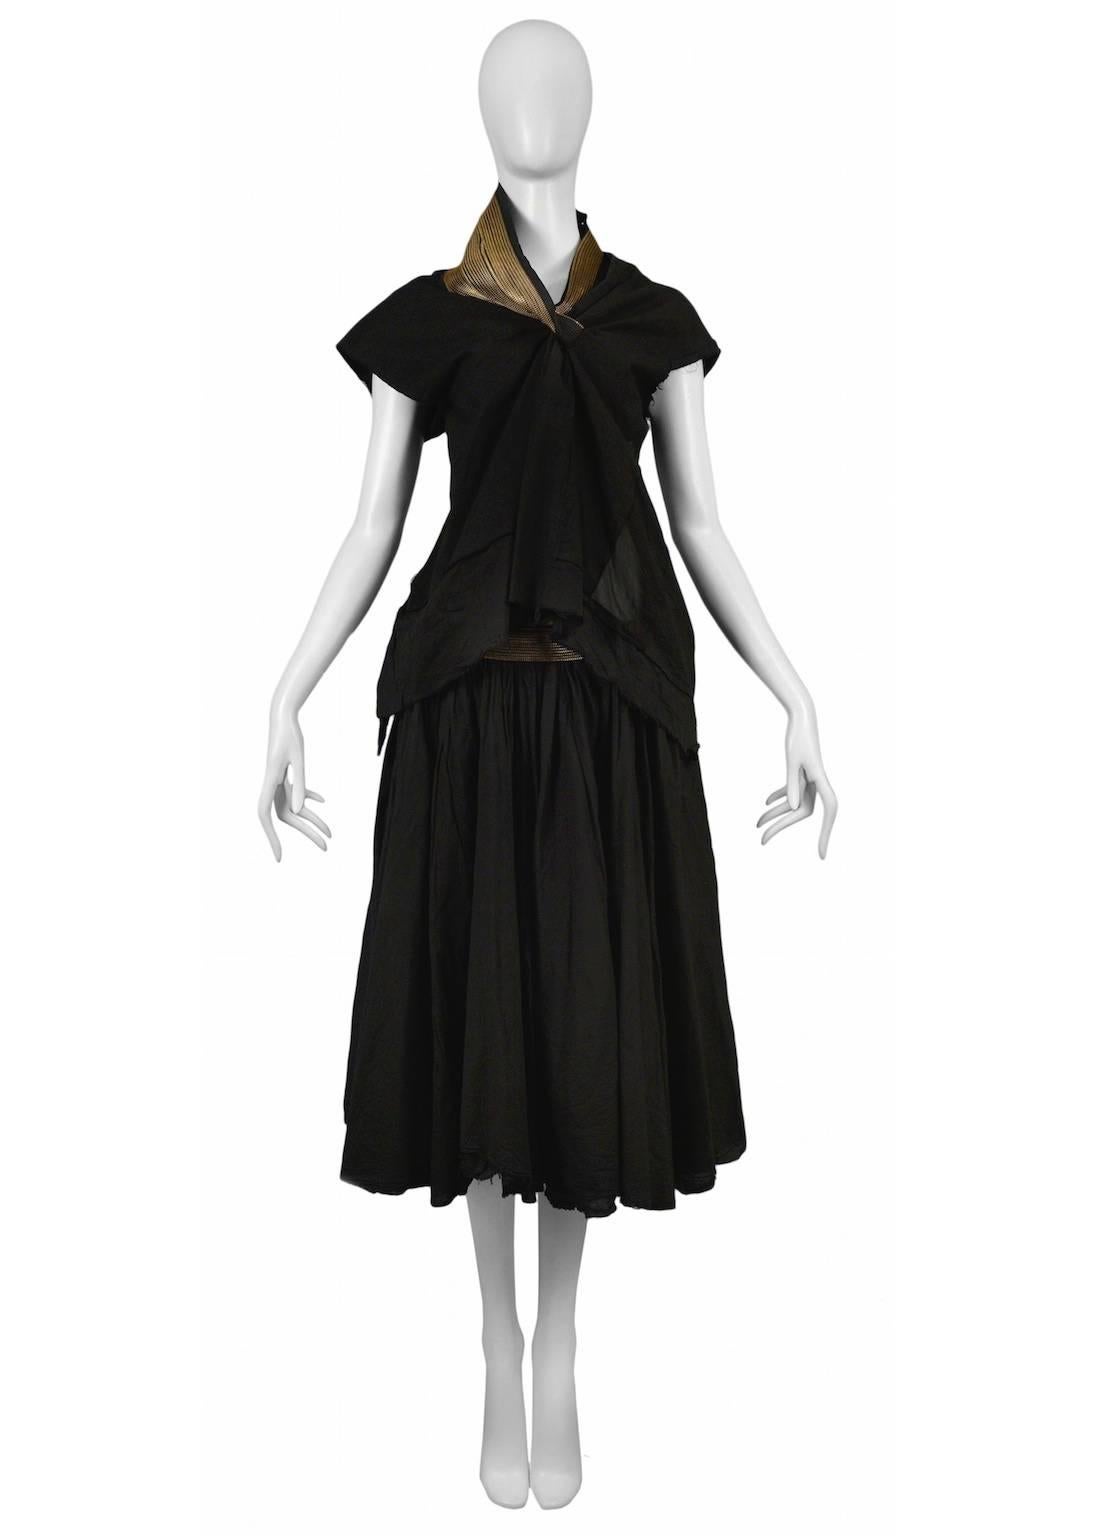 Resurrection Vintage is excited to offer a vintage Junya Watanabe for Comme des Garcons black cotton top and skirt with zipper details. The top features a high neck with zipper inset, cap sleeves, and open back. The skirt is low waisted and has a